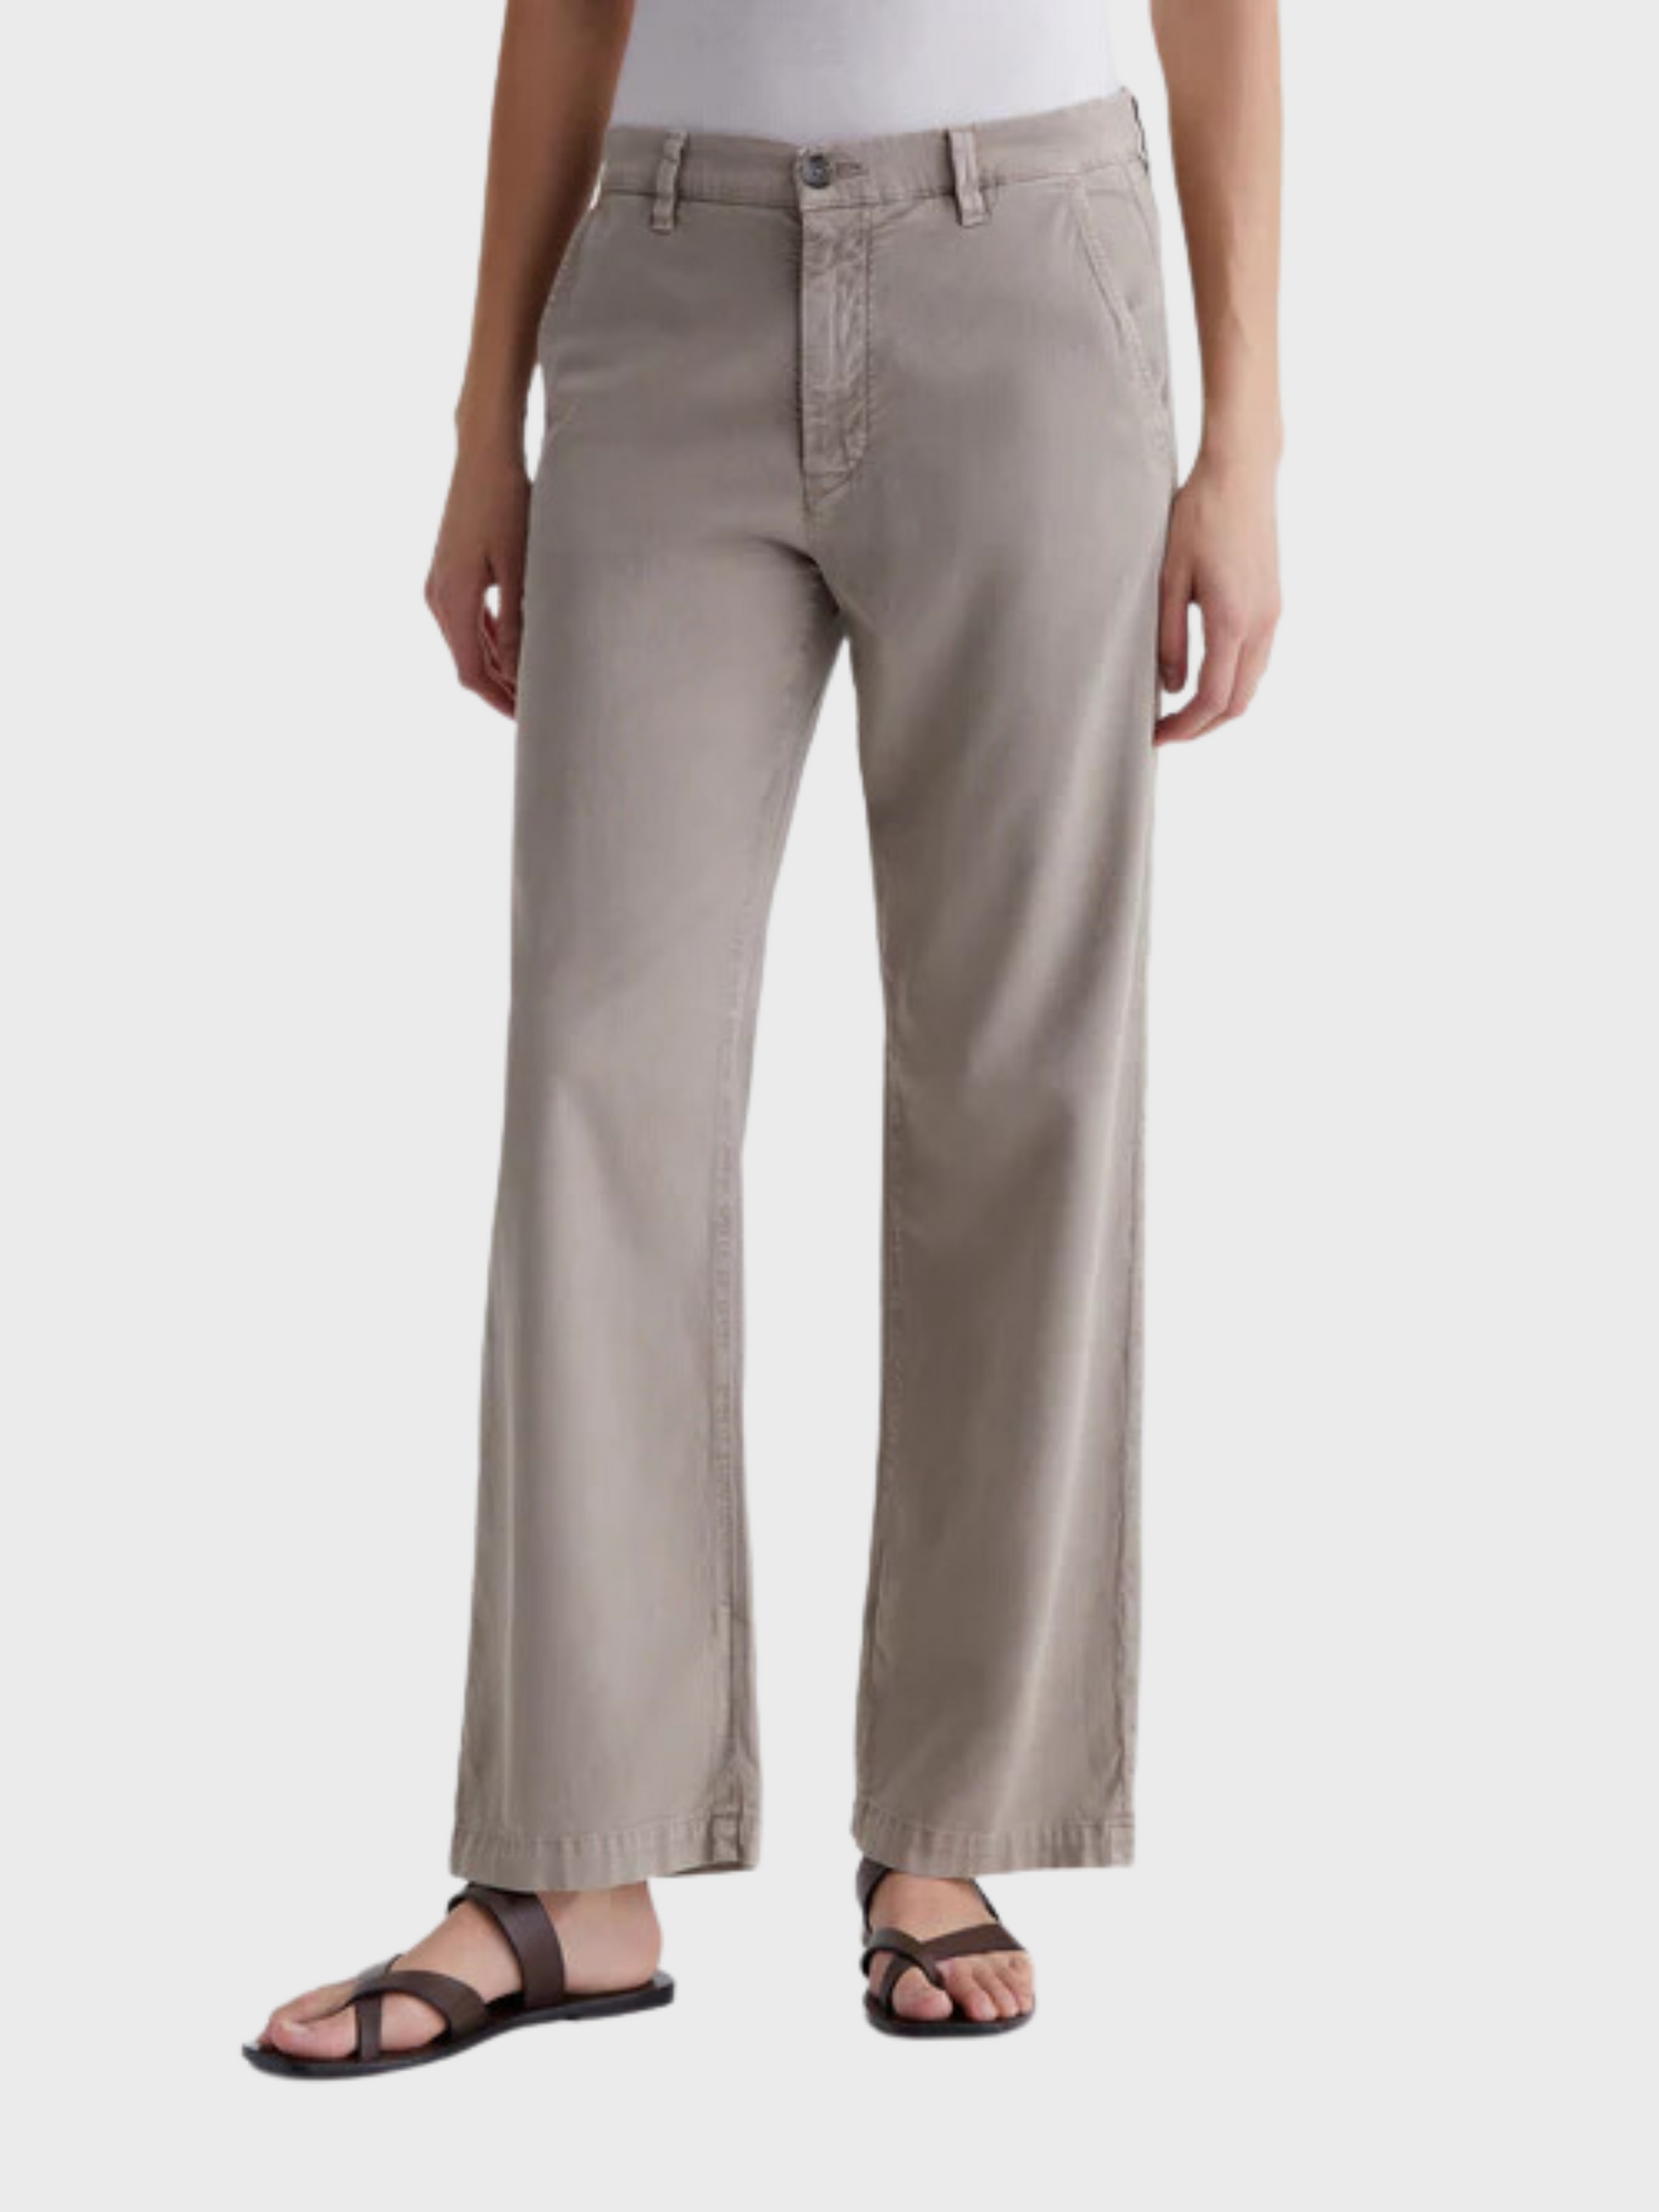 AG Caden Straight Trouser Sulfur Desert Taupe-Pants-23-West of Woodward Boutique-Vancouver-Canada